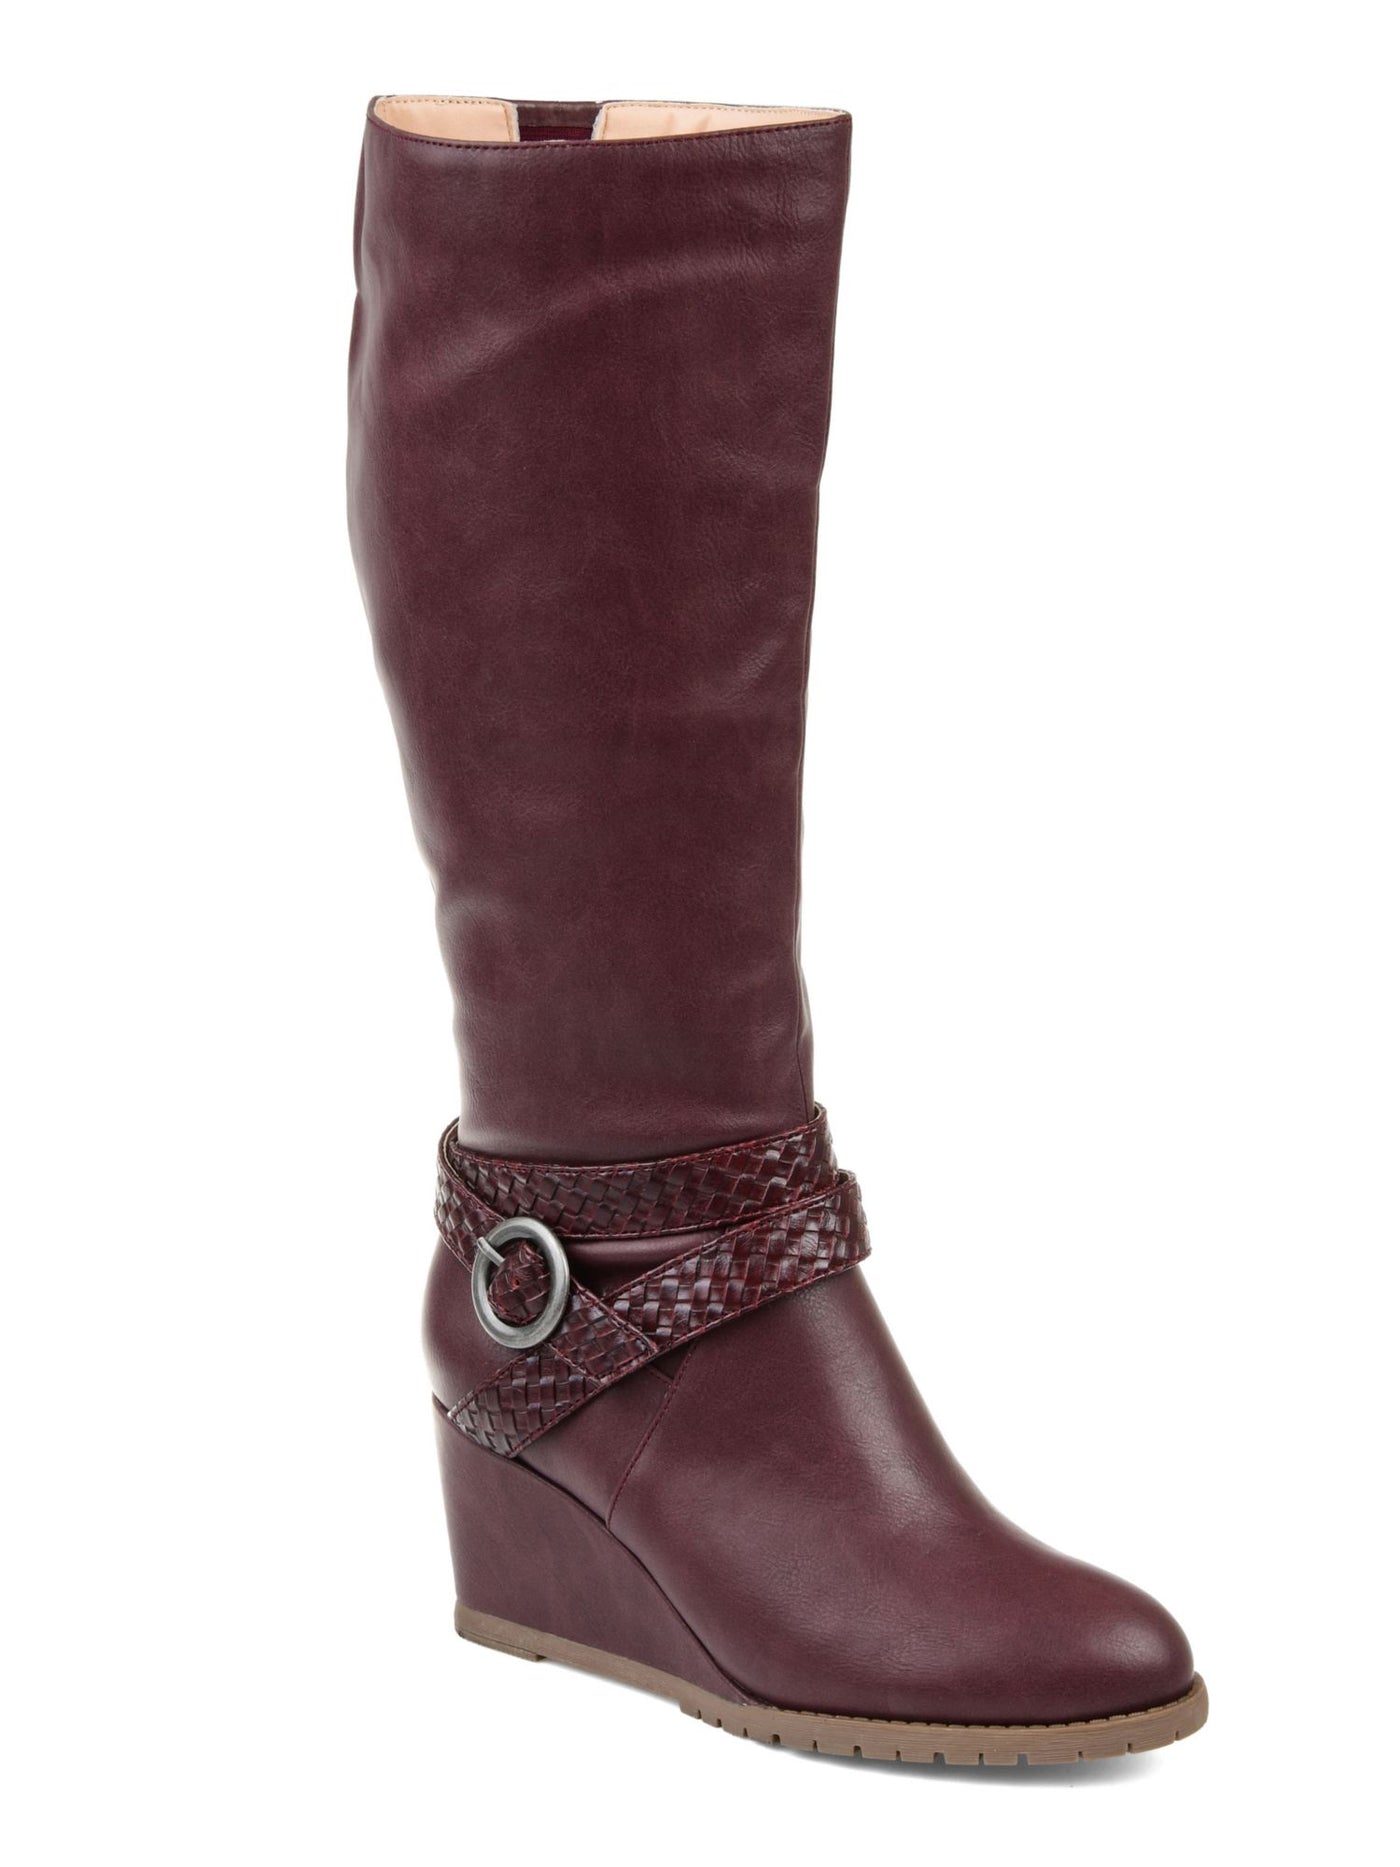 JOURNEE COLLECTION Womens Wine Burgundy Woven Buckle Straps Cushioned Garin Almond Toe Wedge Zip-Up Heeled Boots 9 XWC